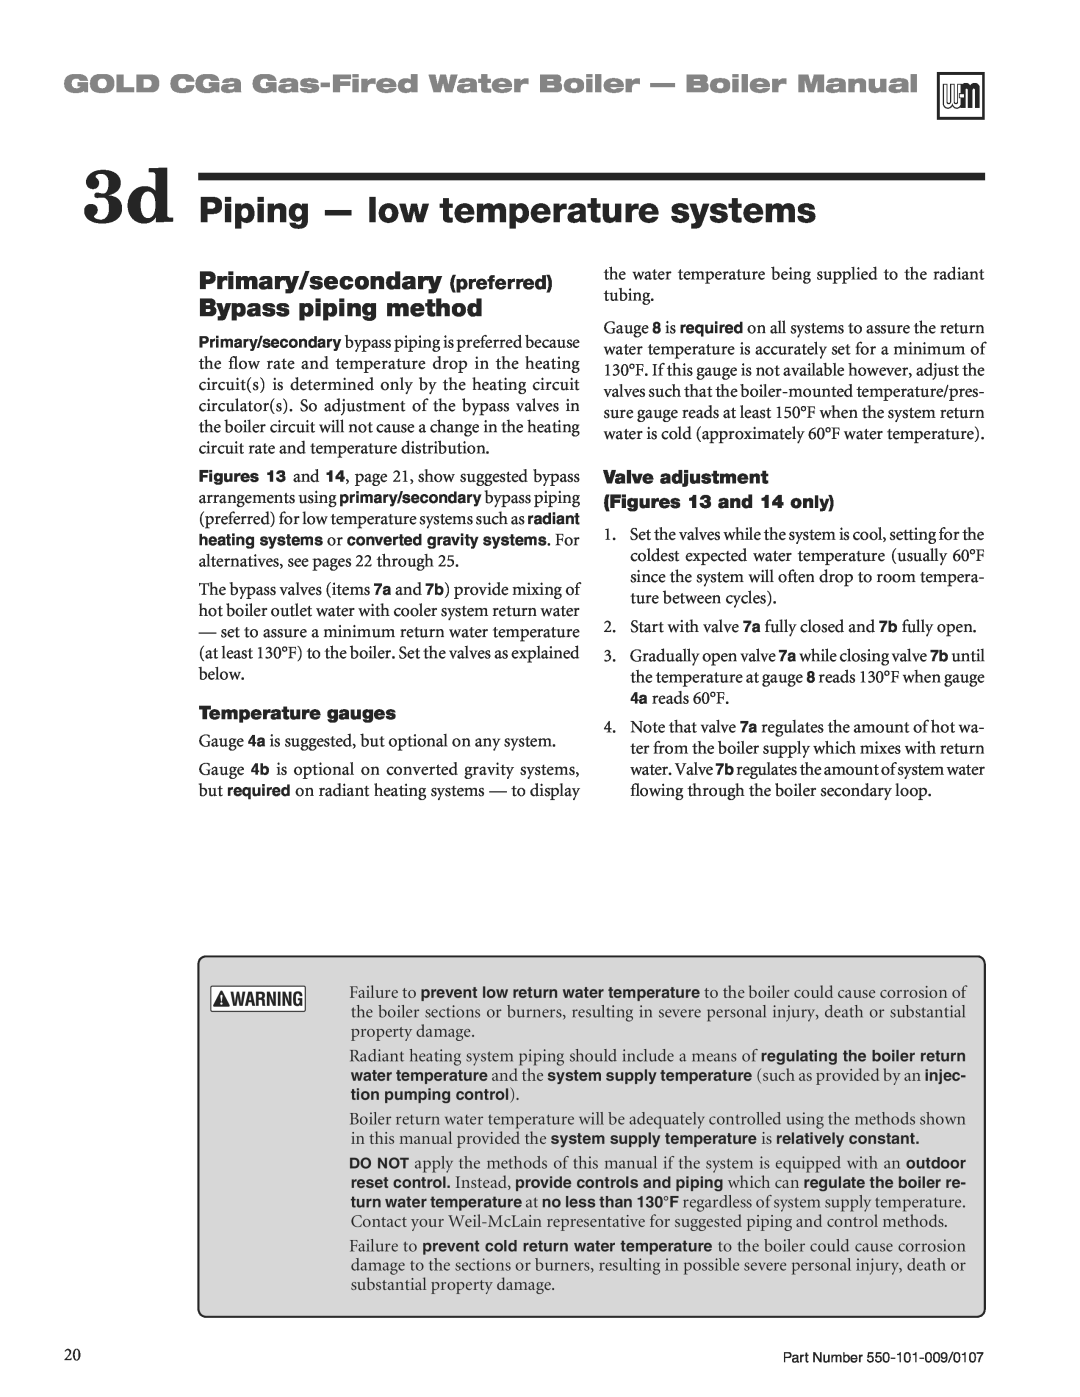 Weil-McLain CGA25SPDN manual 3d Piping - low temperature systems, GOLD CGa Gas-FiredWater Boiler - Boiler Manual 